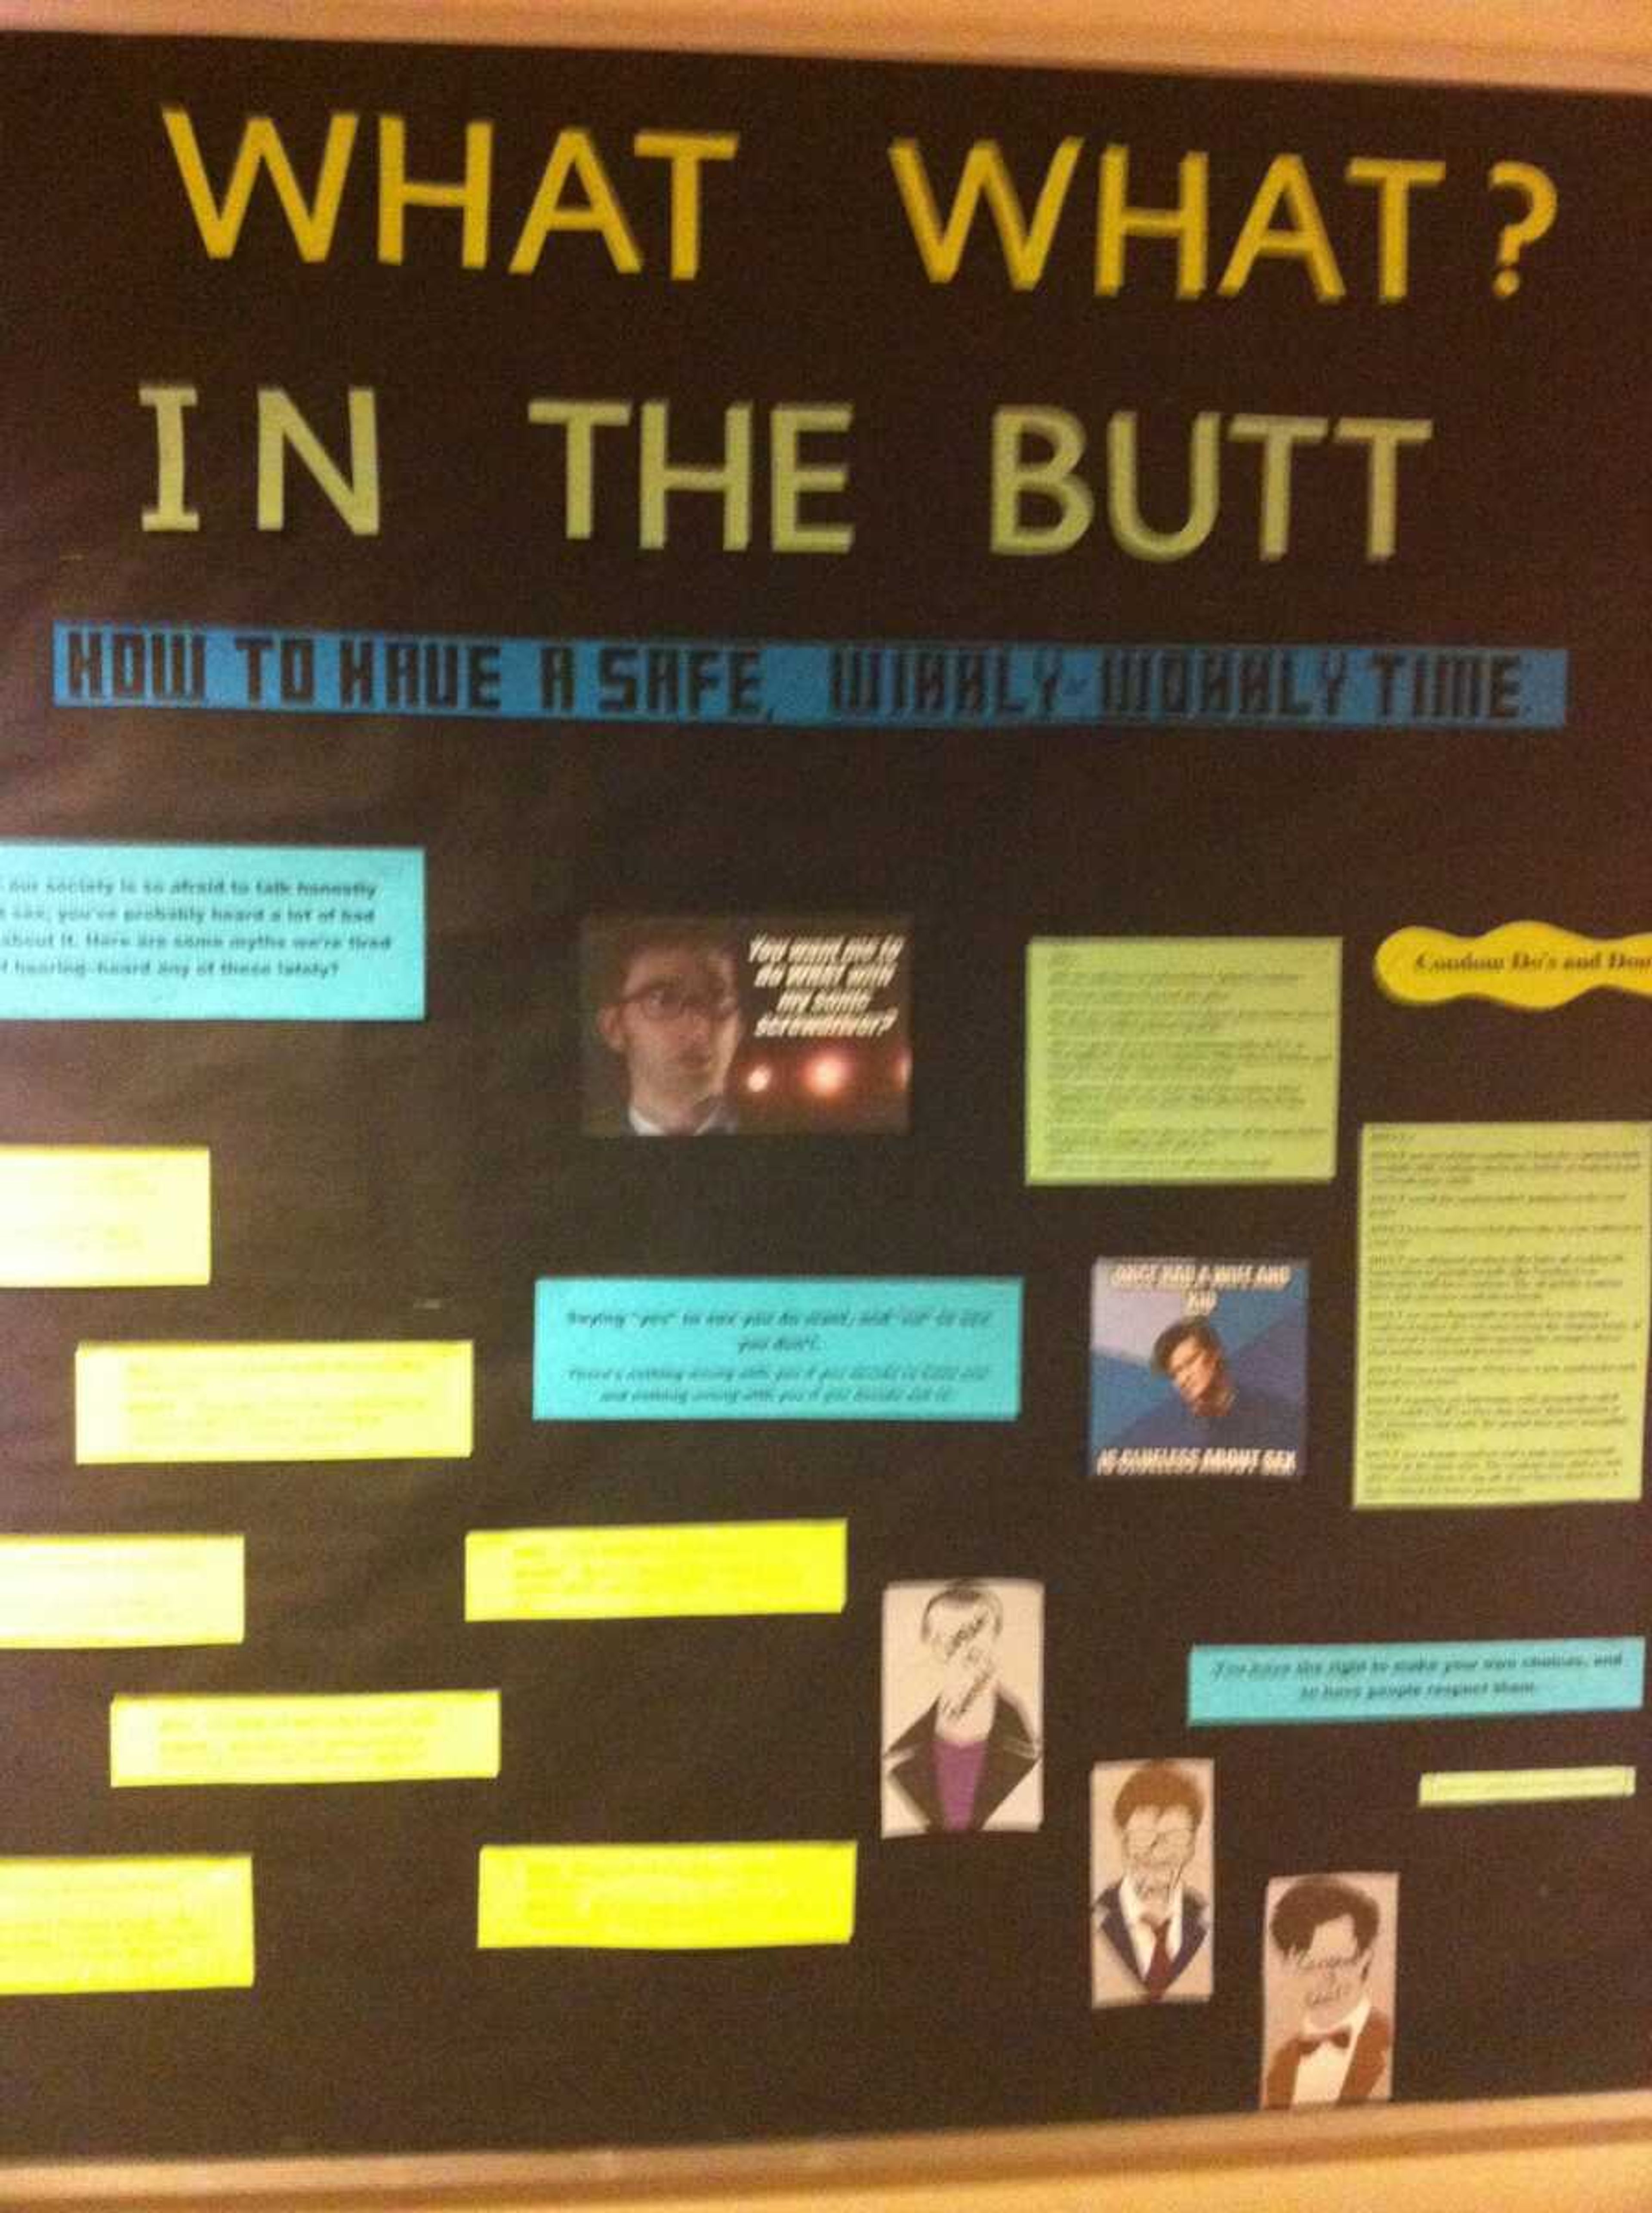 The controversial sexual education board located in Merick Hall.